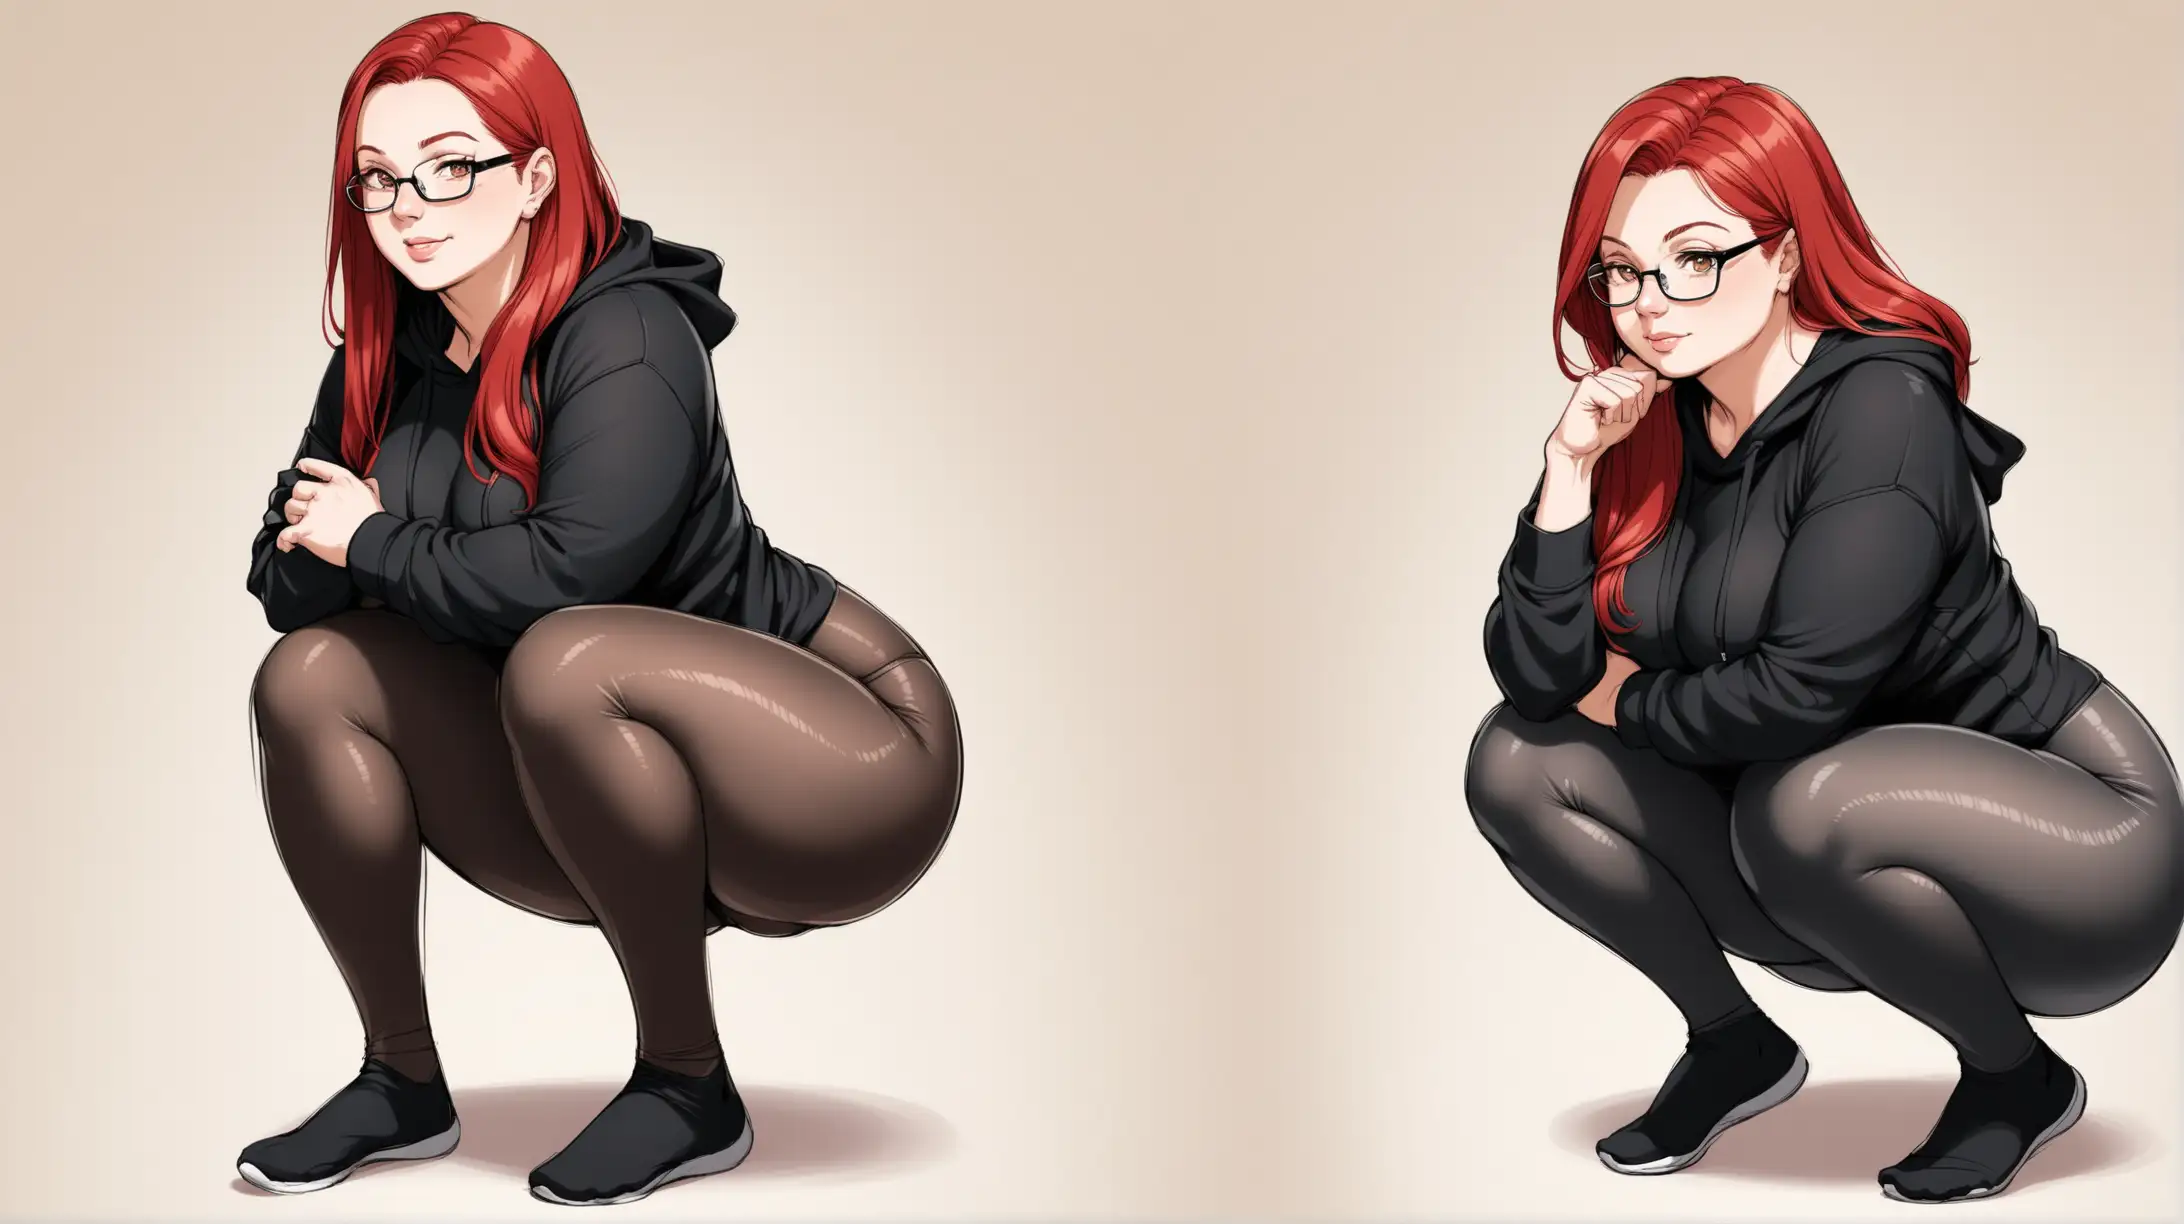 Red Haired Mother and Daughter Exercise Together in Matching Outfits